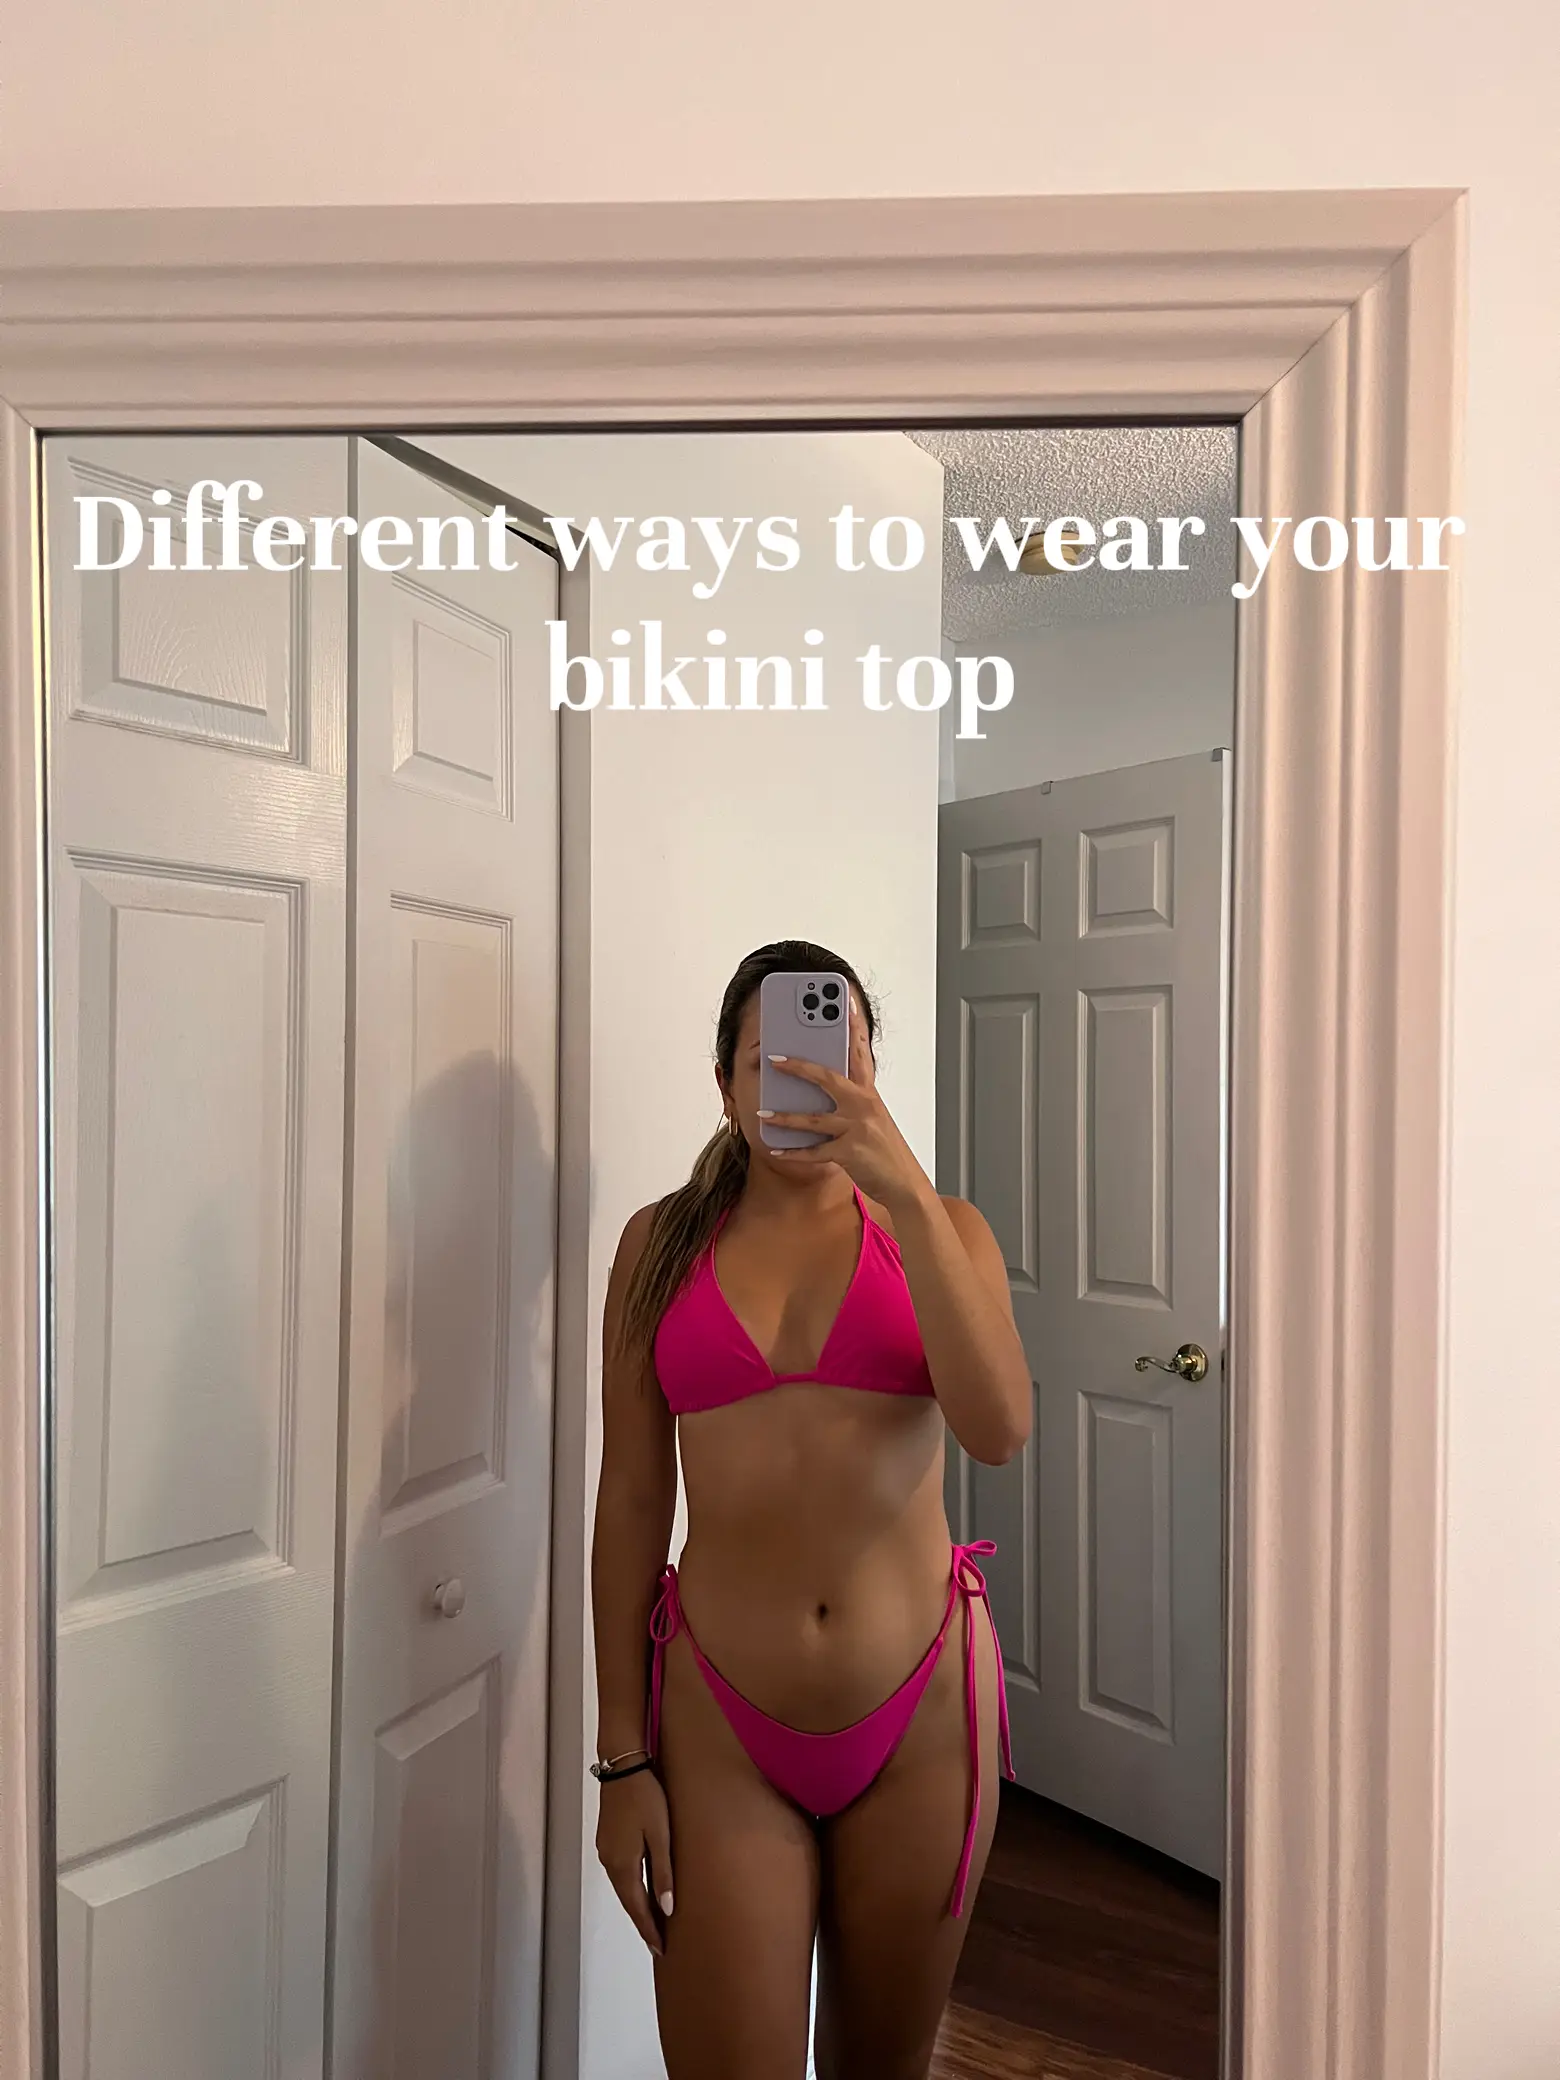 How to make your bikini look different?, Gallery posted by Miurica Duarte